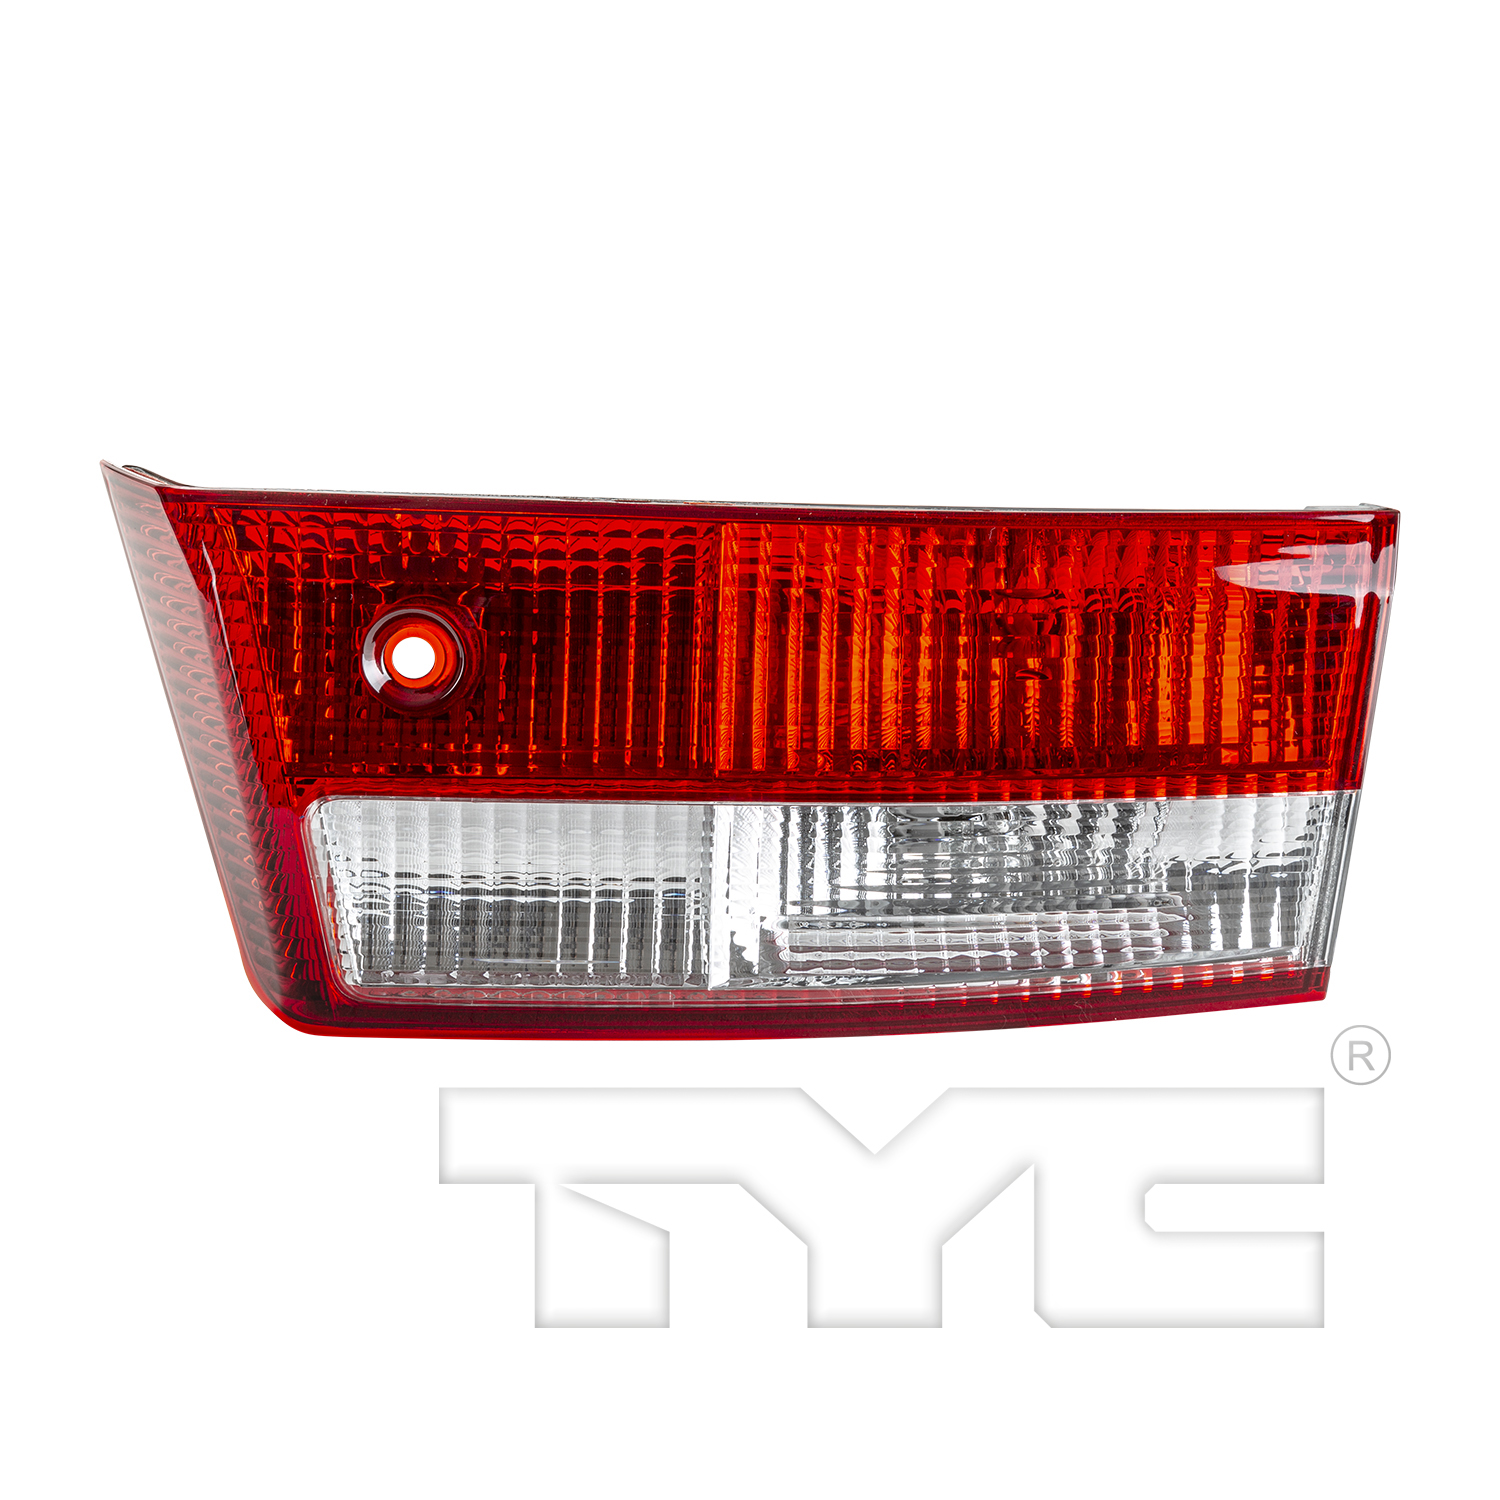 Aftermarket TAILLIGHTS for HONDA - ACCORD, ACCORD,03-05,RT Taillamp assy